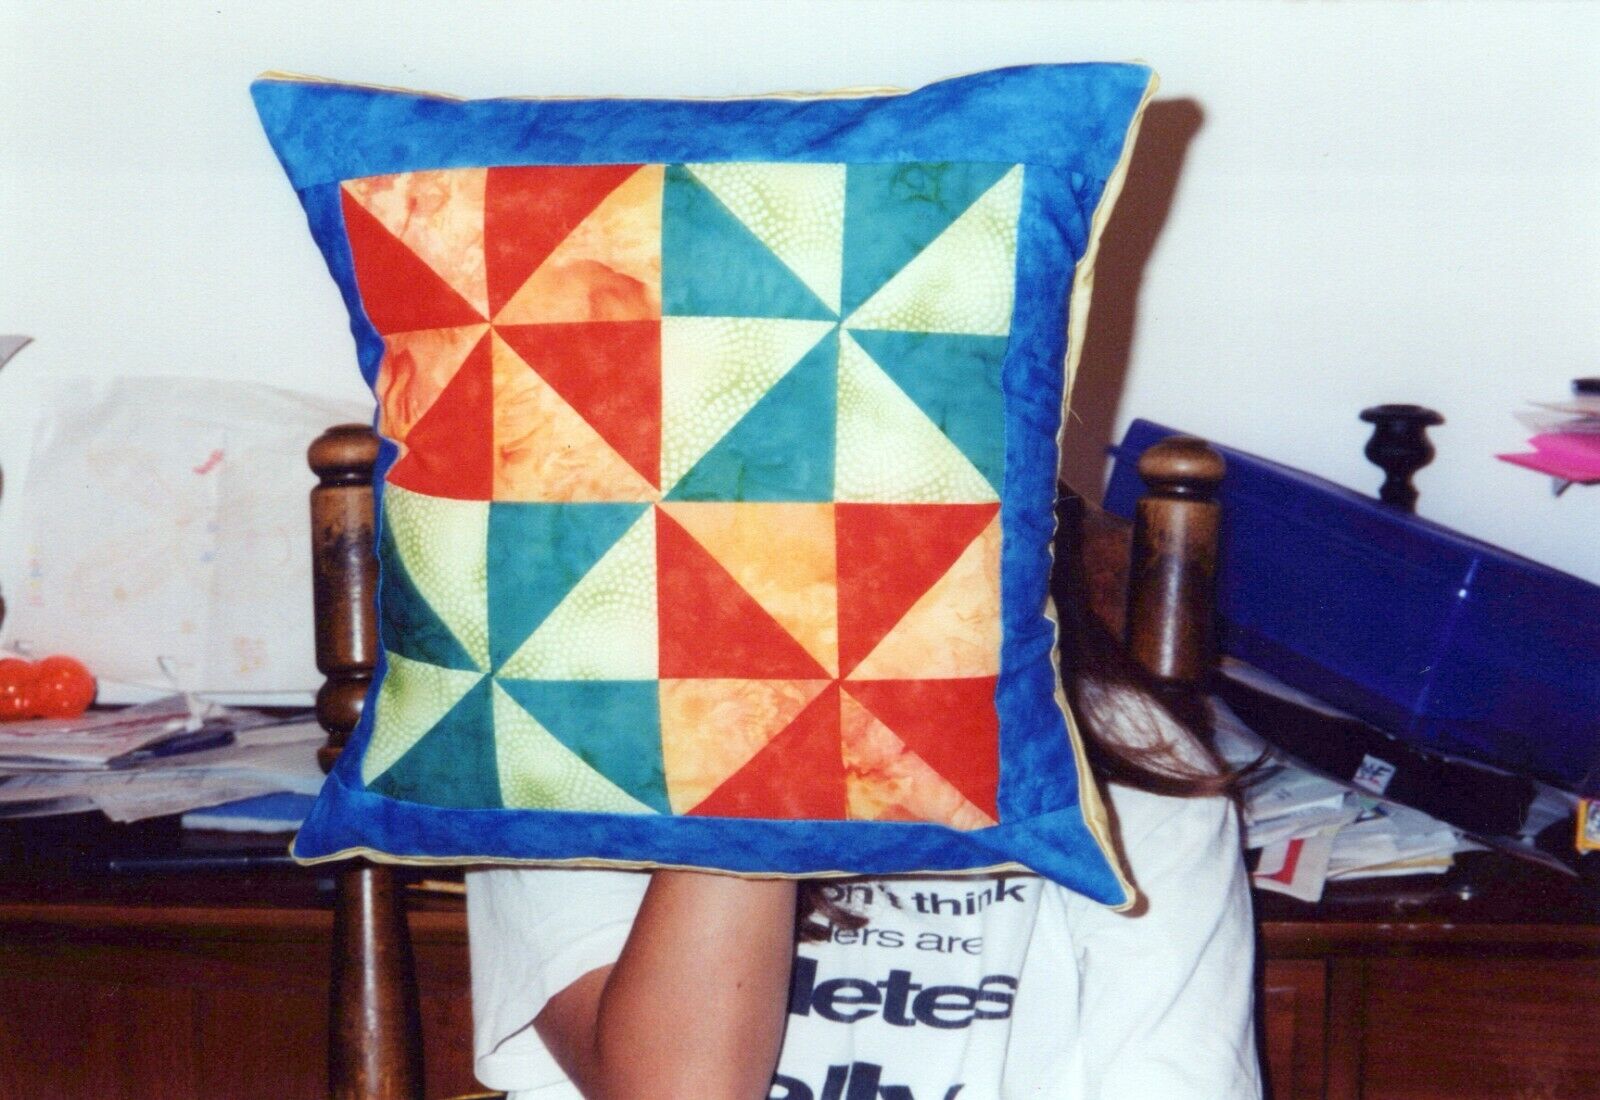 2000's Found Photo - Shy Girl Holds Pillow Over Face To Hide From Camera Shot